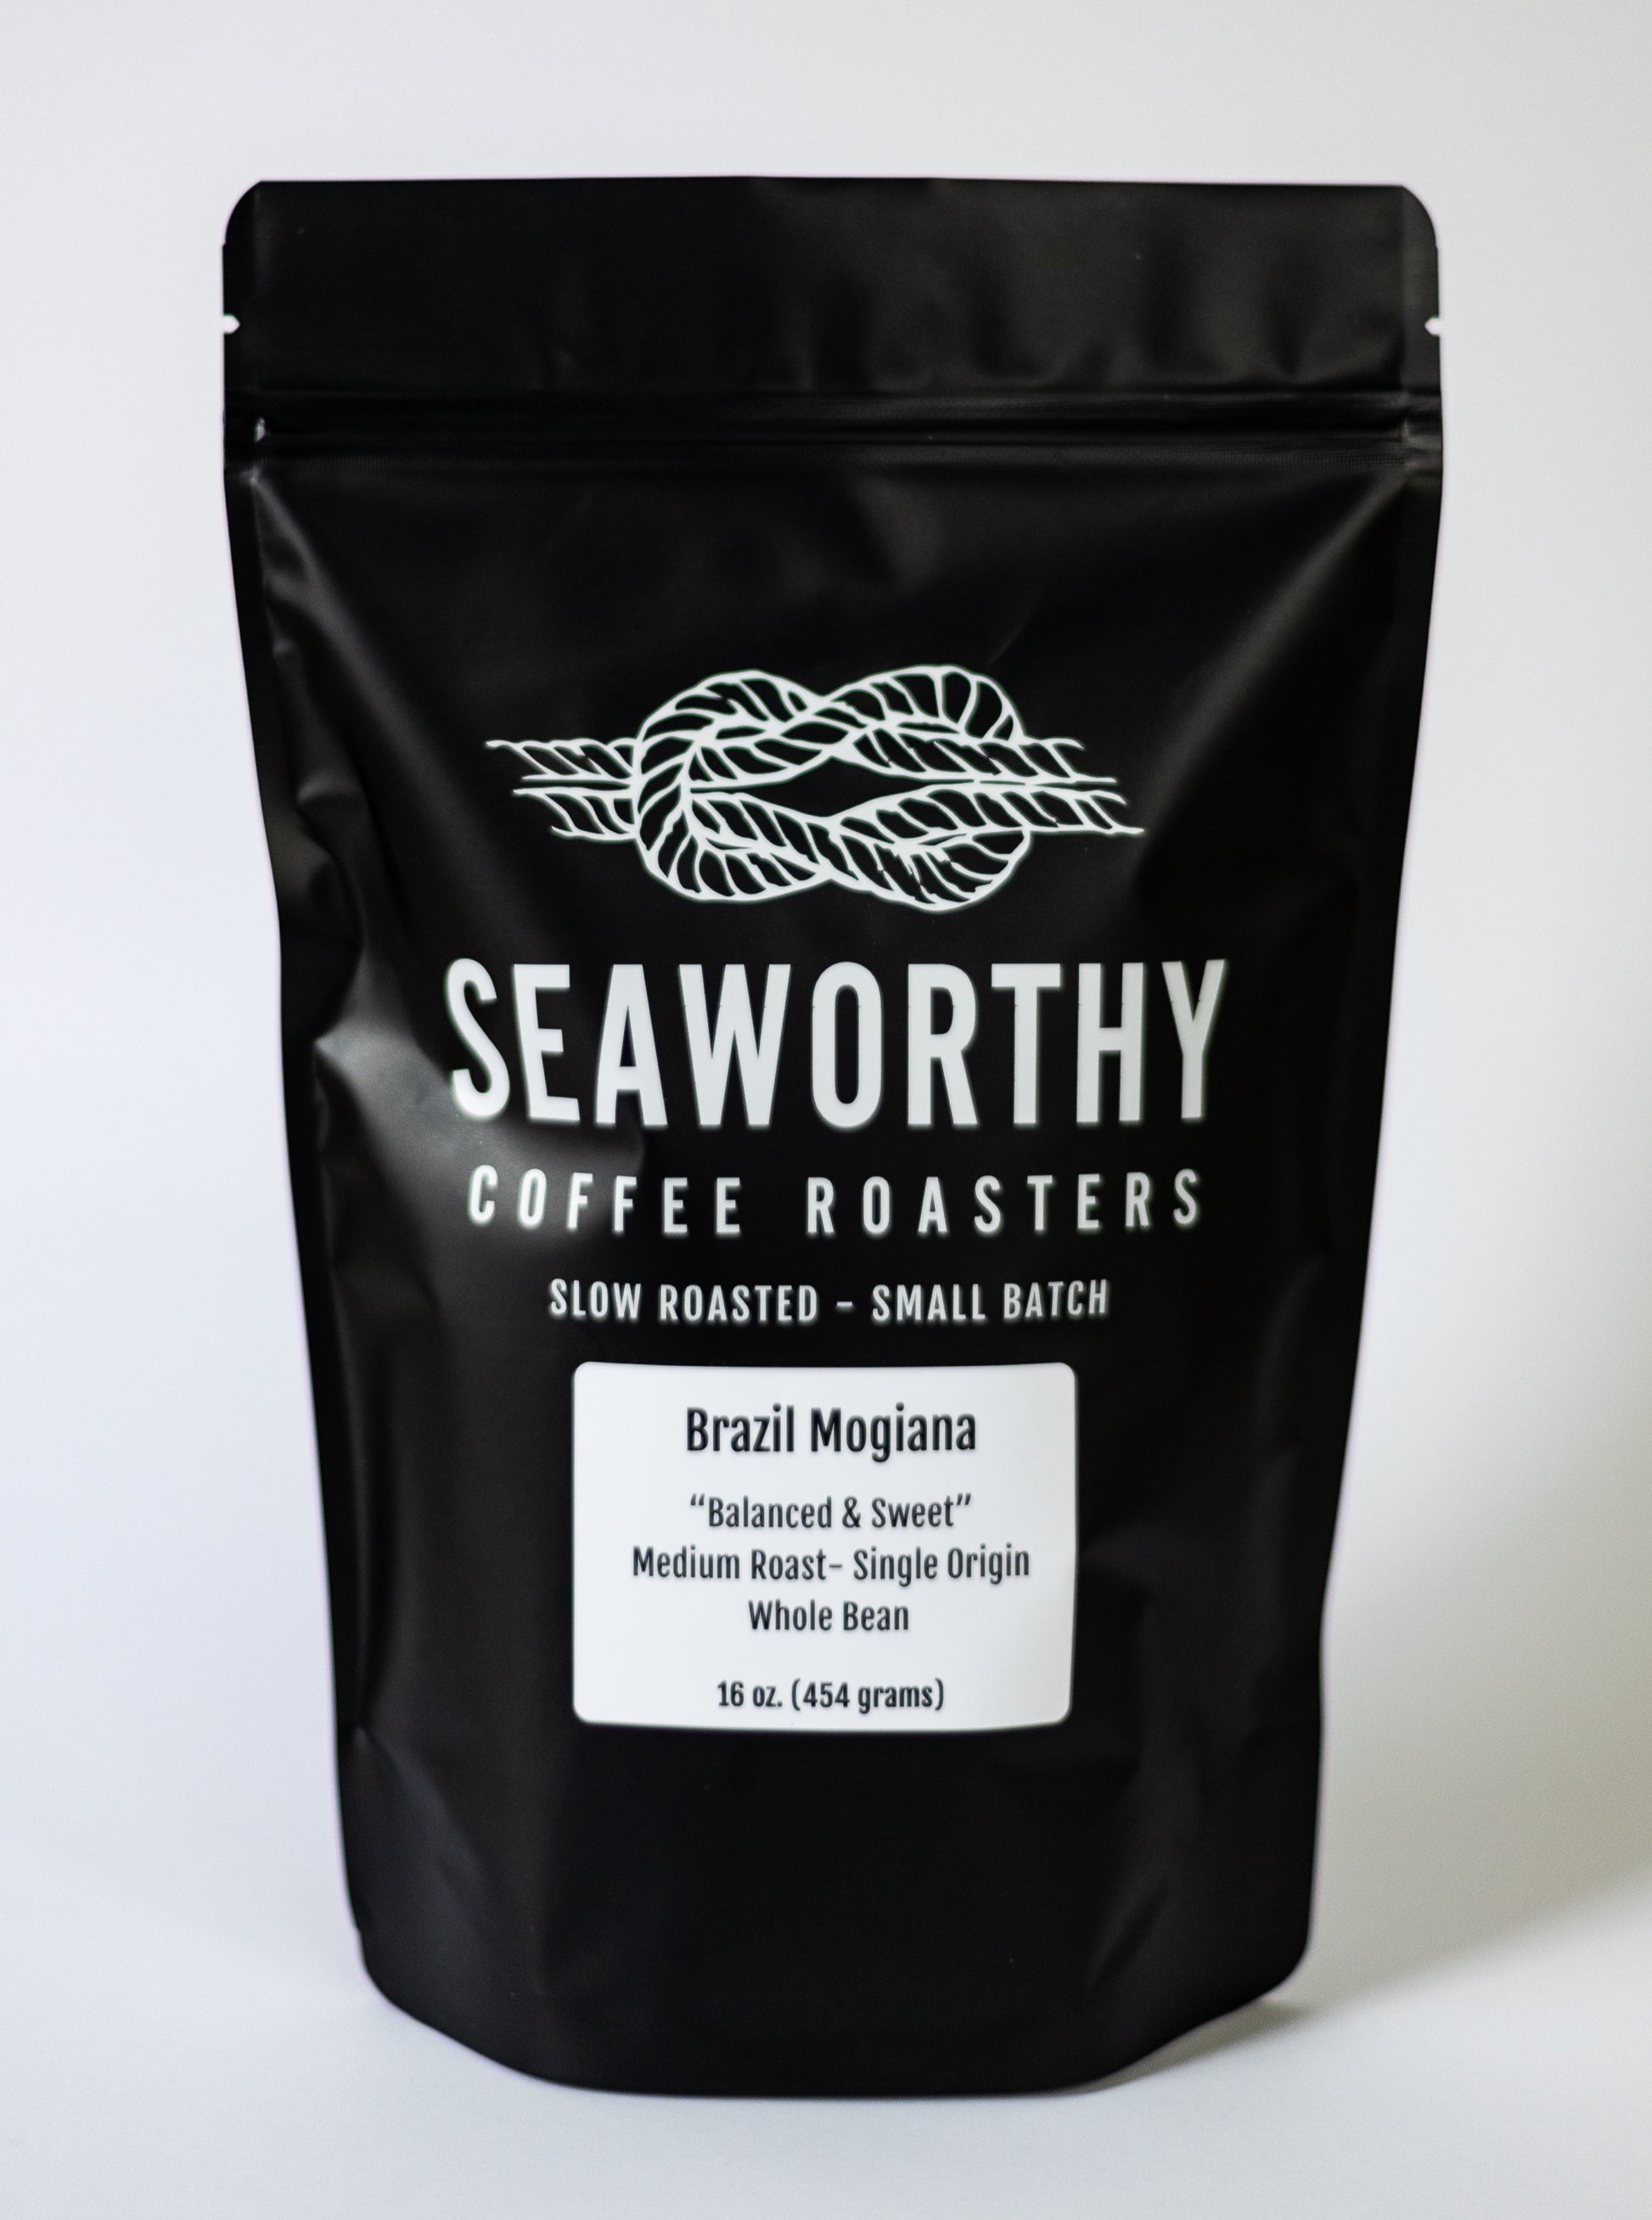 Seaworthy slow roasted, small batch coffee. This single-origin coffee comes to us from the Mogiana region, located in the Brazilian state of Sao Paulo, where they've been growing high quality Arabica coffee for over 200 years. Coffee grown in this region is known for it's smooth bodied, perfectly balanced, sweet & mild cup characteristics and that's exactly what you can expect here! This is a downright excellent cup of coffee with notes of sweet cocoa and light brown sugar.